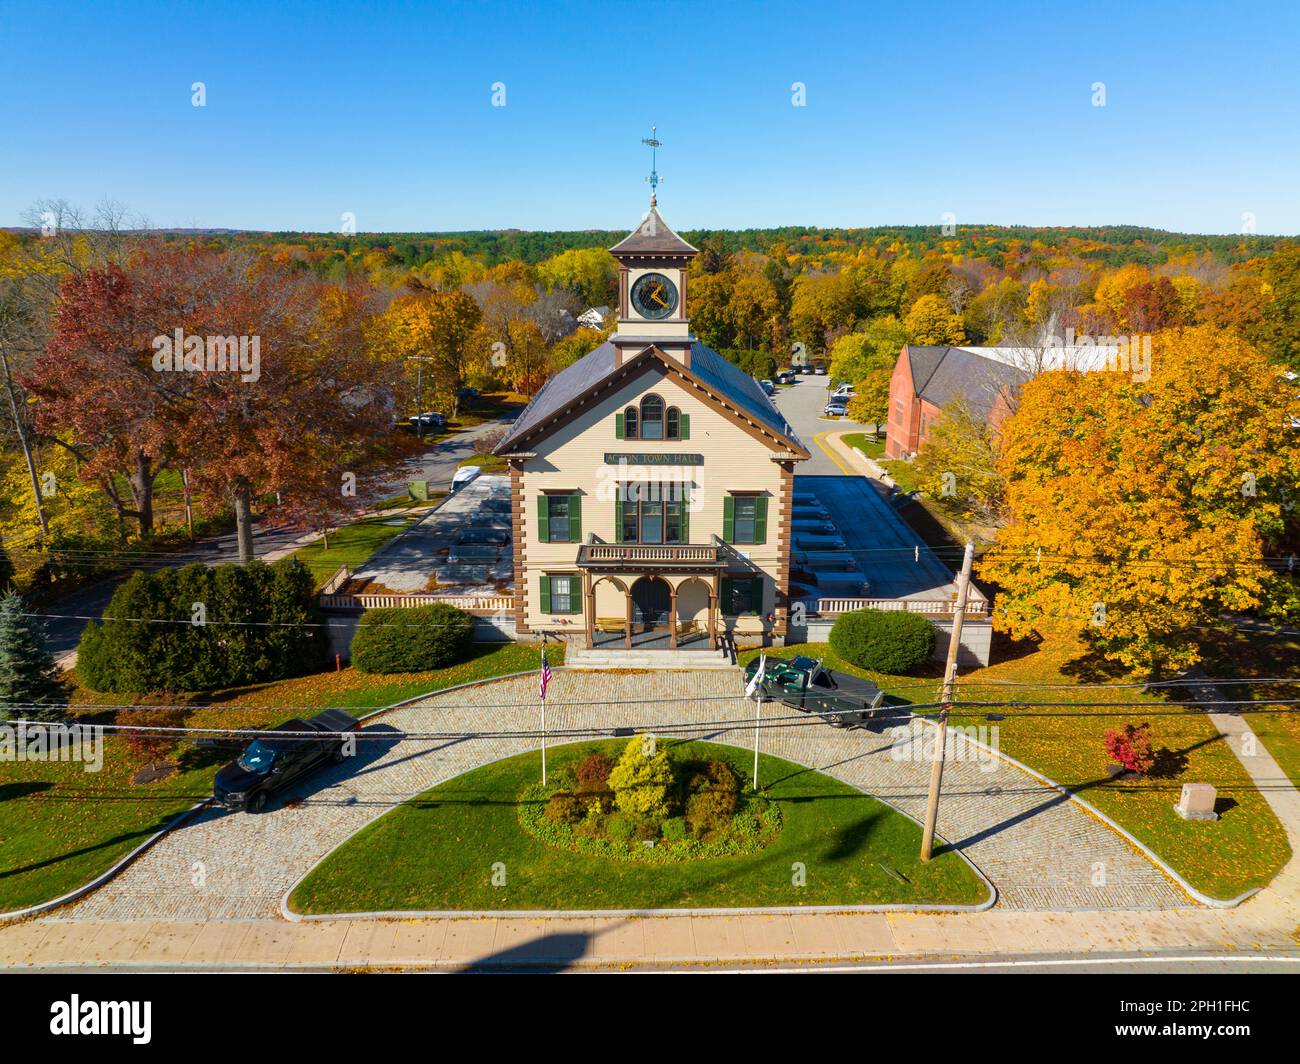 Acton Town Hall Aerial View In 472 Main Street In Historic Town Center Of Acton Massachusetts Ma Usa 2PH1FHC 